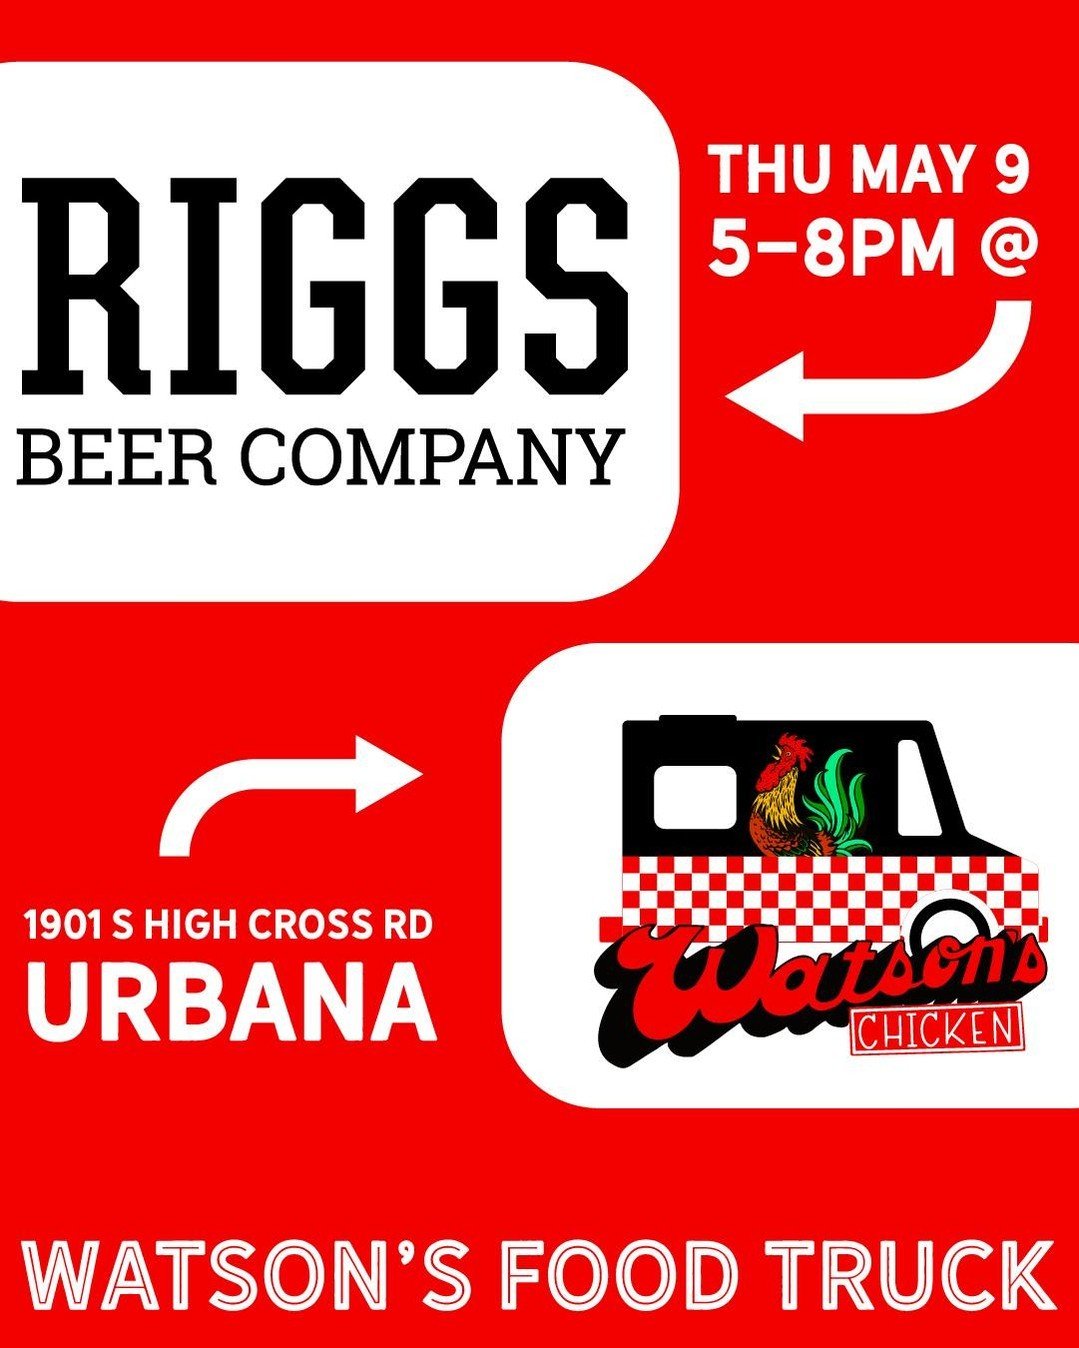 Come out to Urbana and see us at @riggs_beer_company!